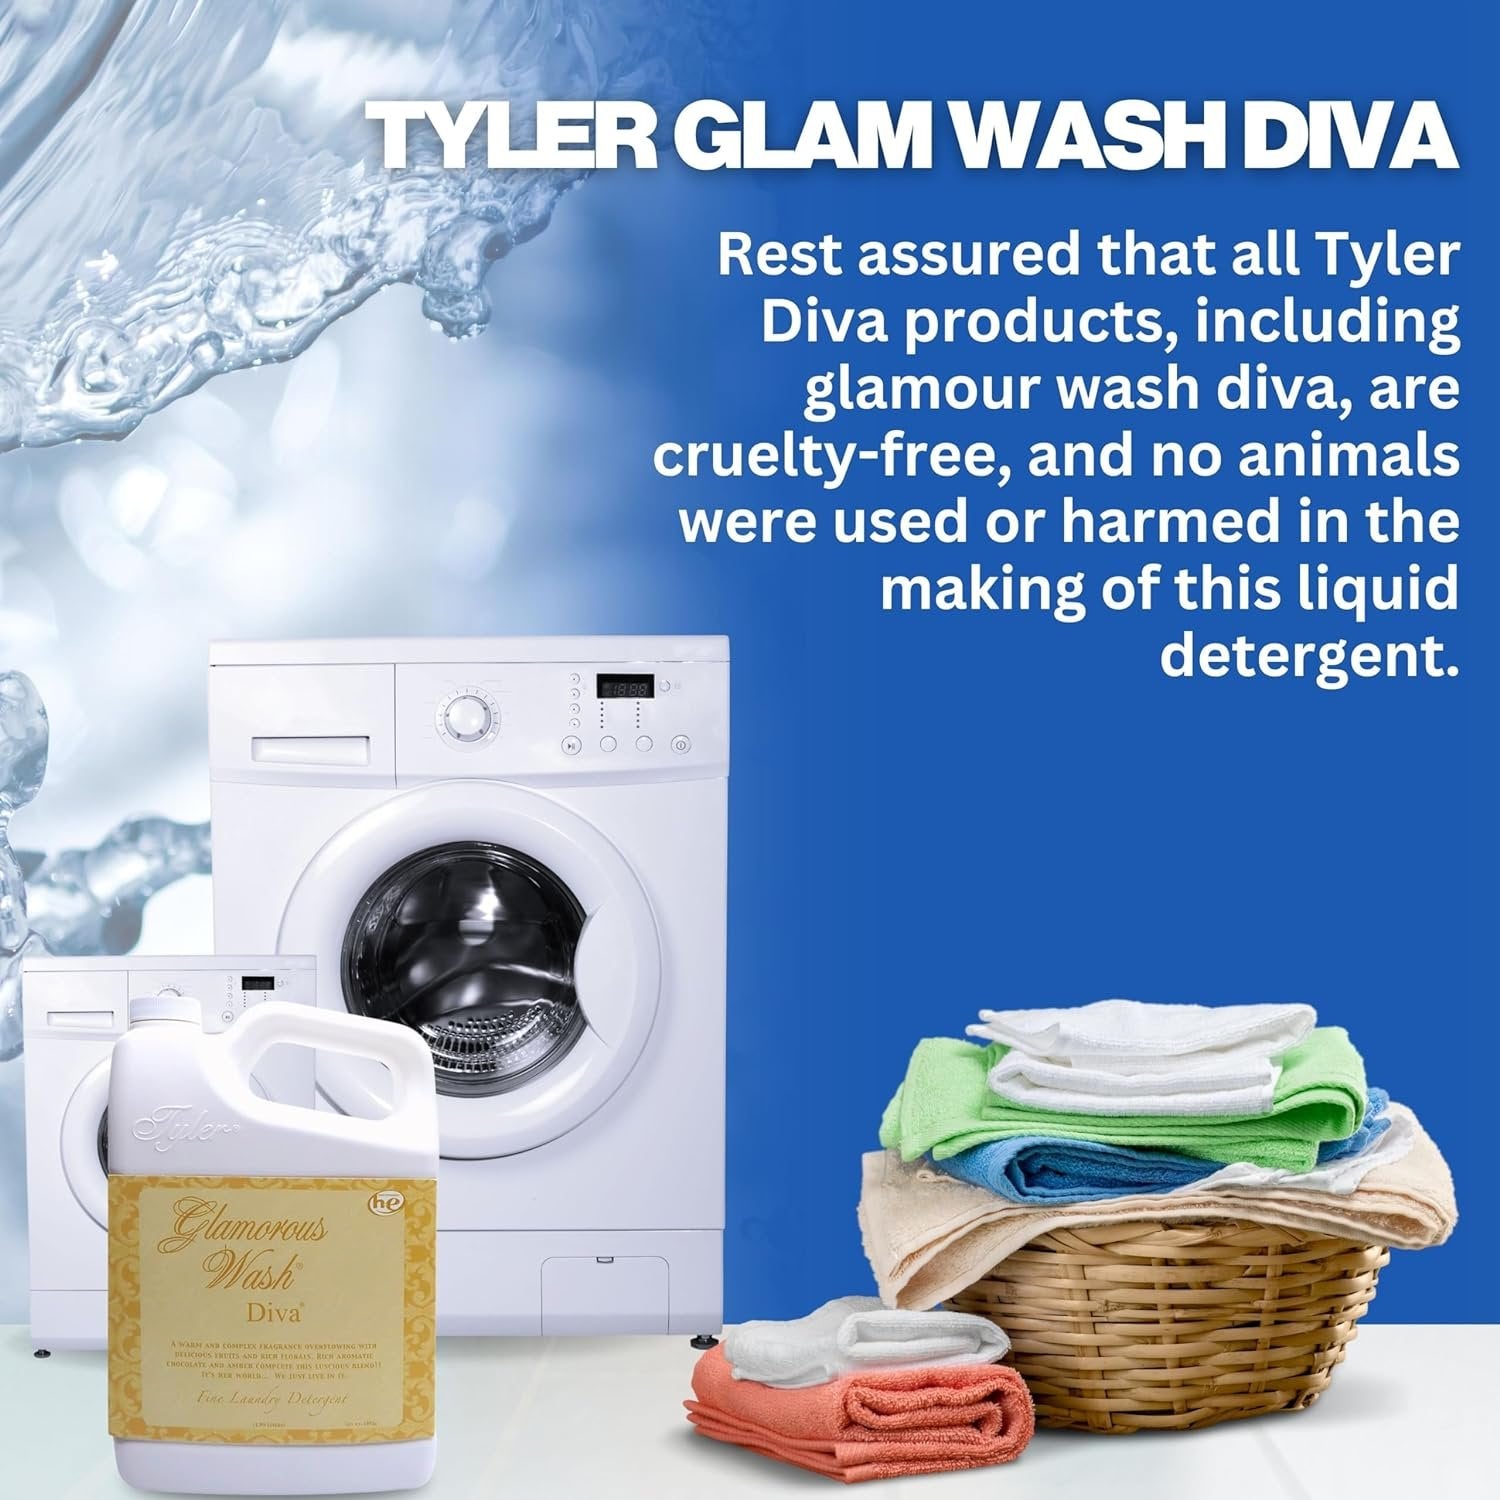 Tyler Candle Company Glamorous Wash Diva Fine Laundry Liquid Detergent - Hand and Machine Washable - 1.89 L (64oz) - Pack of 1 with Multi-Purpose Key Chain